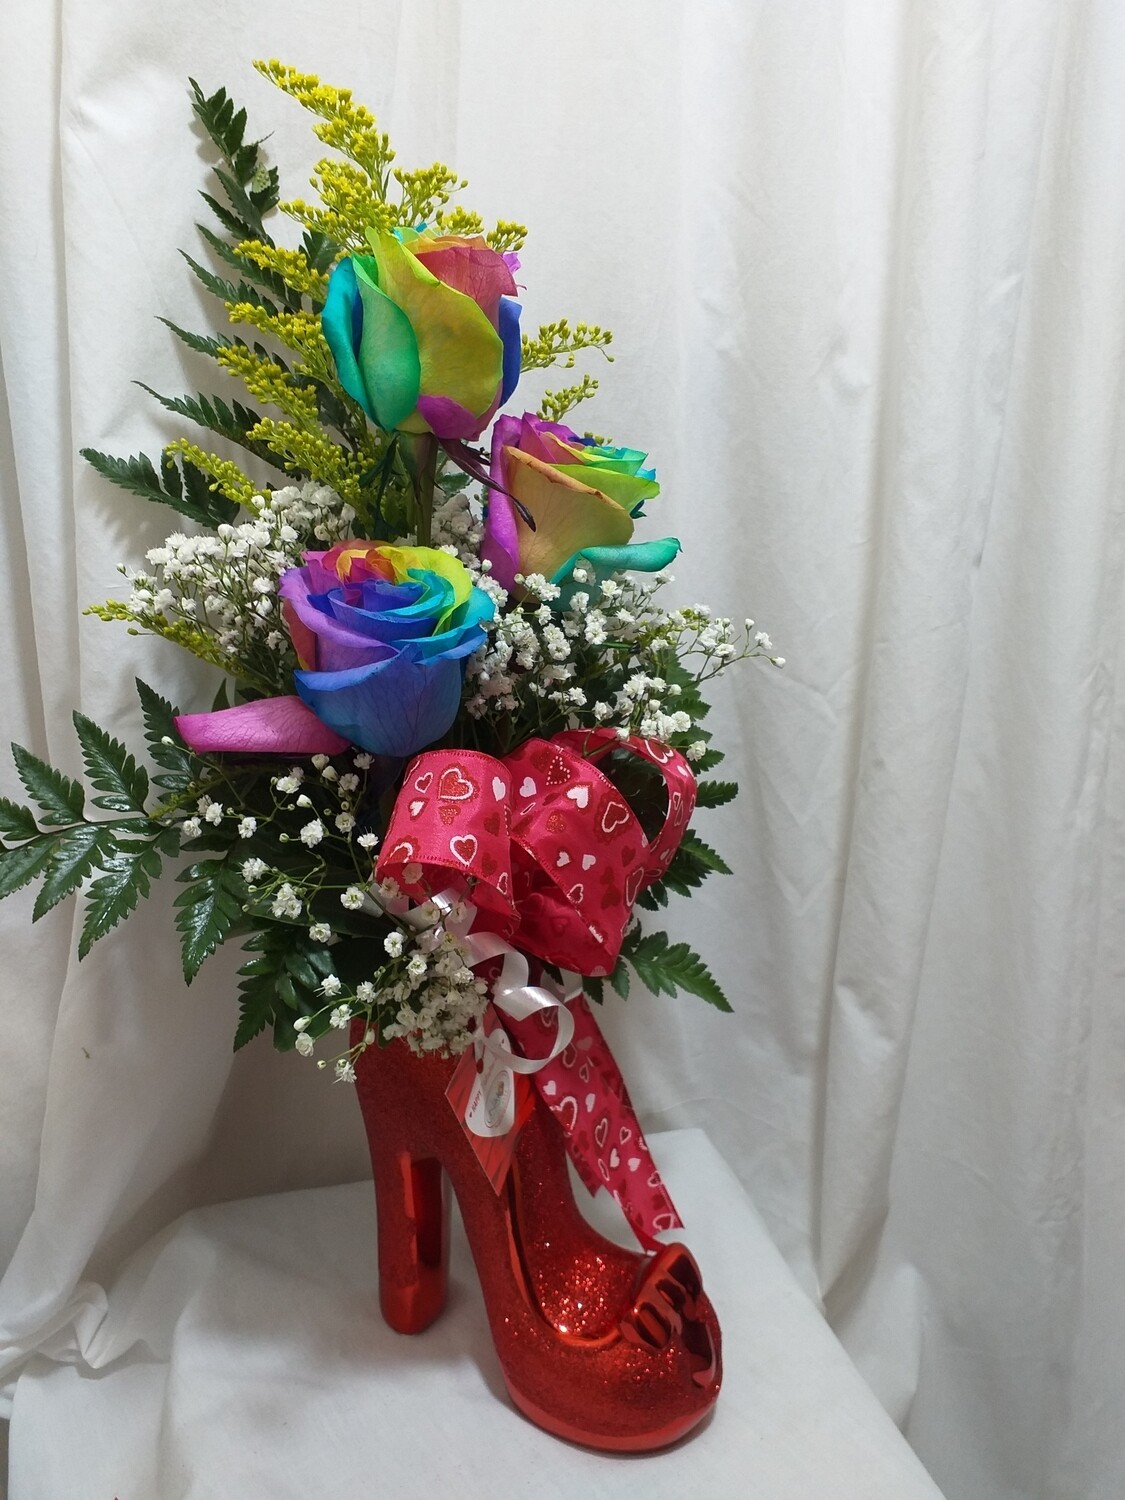 3 Rainbow roses in a red shoe vase 